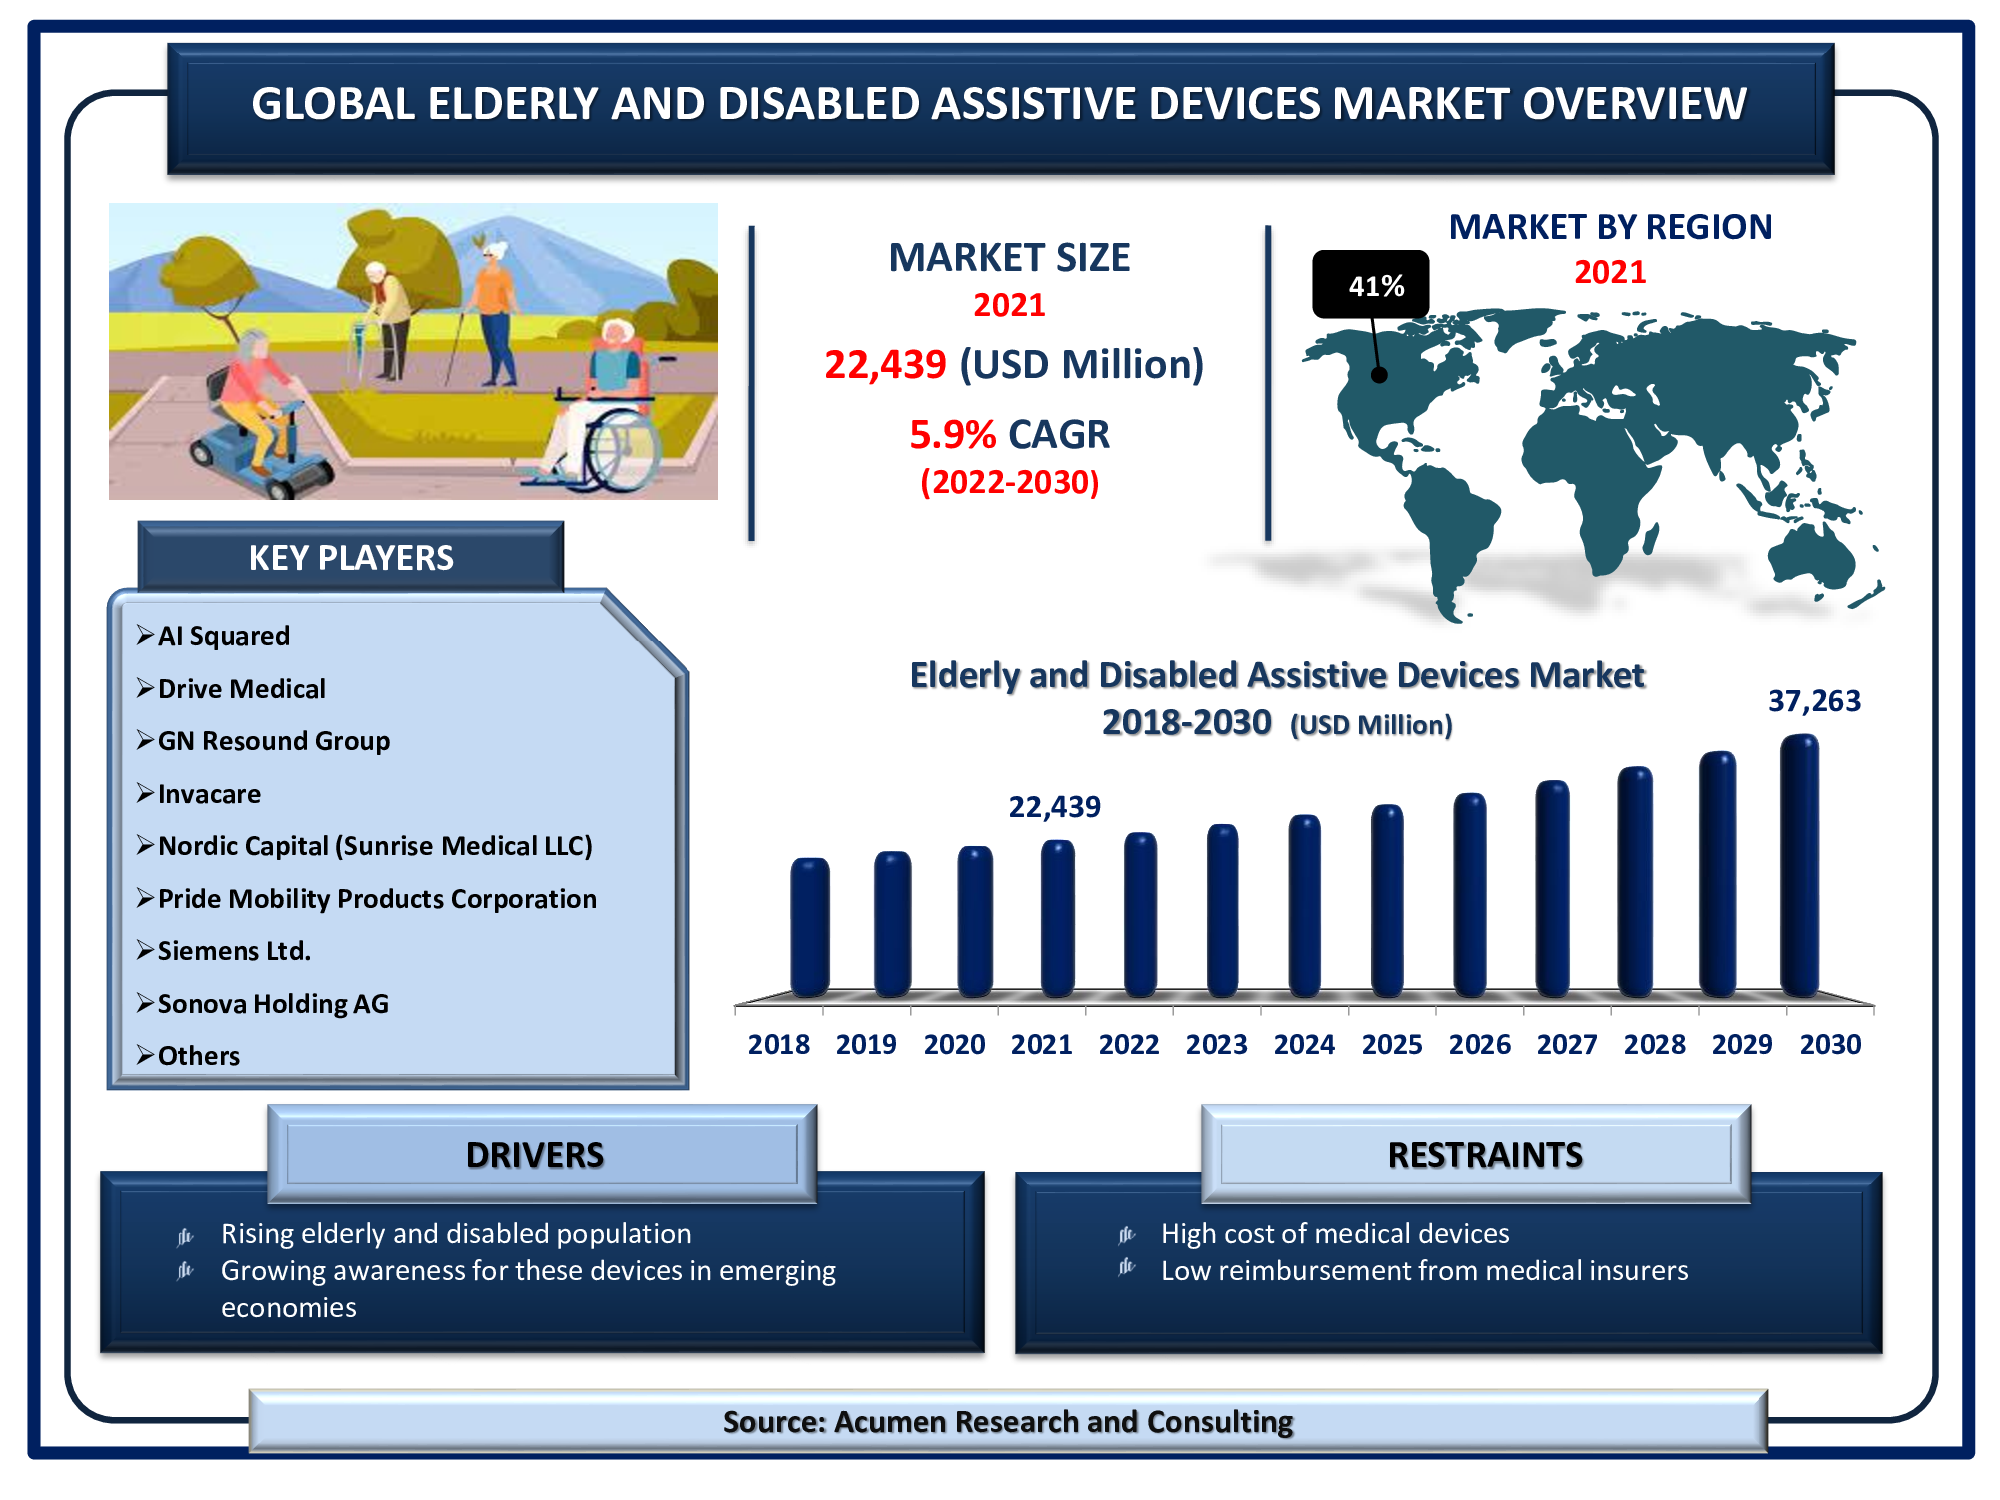 Elderly and Disabled Assistive Devices Market Size is valued at USD 22,439 Million in 2021 and is projected to reach a market size of USD 37,263 Million by 2030; growing at a CAGR of 5.9%.